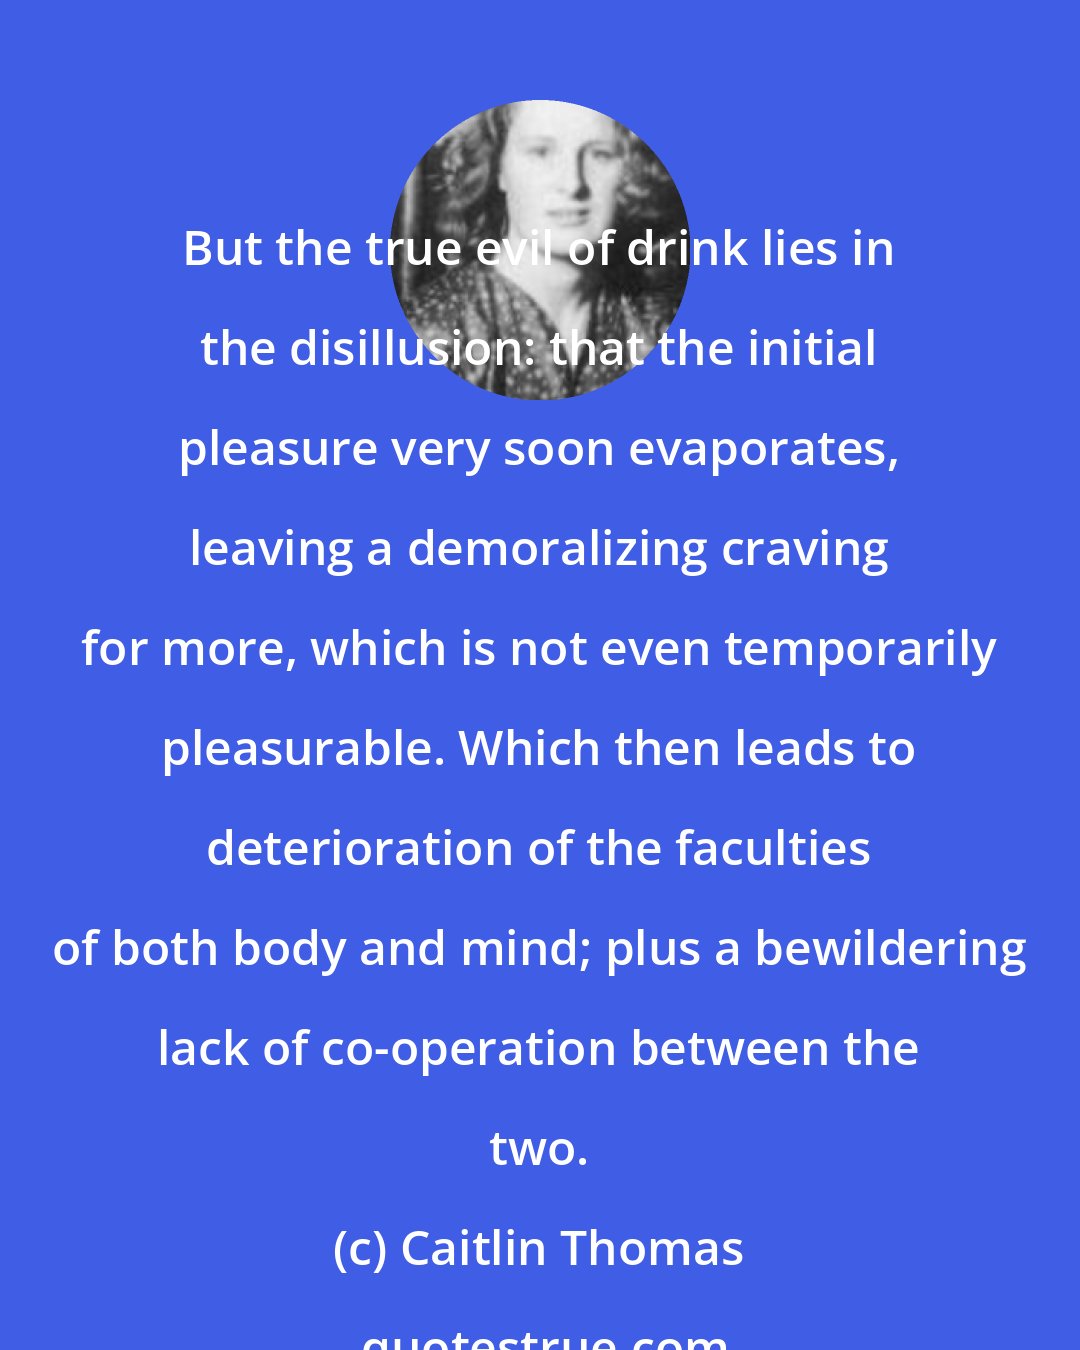 Caitlin Thomas: But the true evil of drink lies in the disillusion: that the initial pleasure very soon evaporates, leaving a demoralizing craving for more, which is not even temporarily pleasurable. Which then leads to deterioration of the faculties of both body and mind; plus a bewildering lack of co-operation between the two.